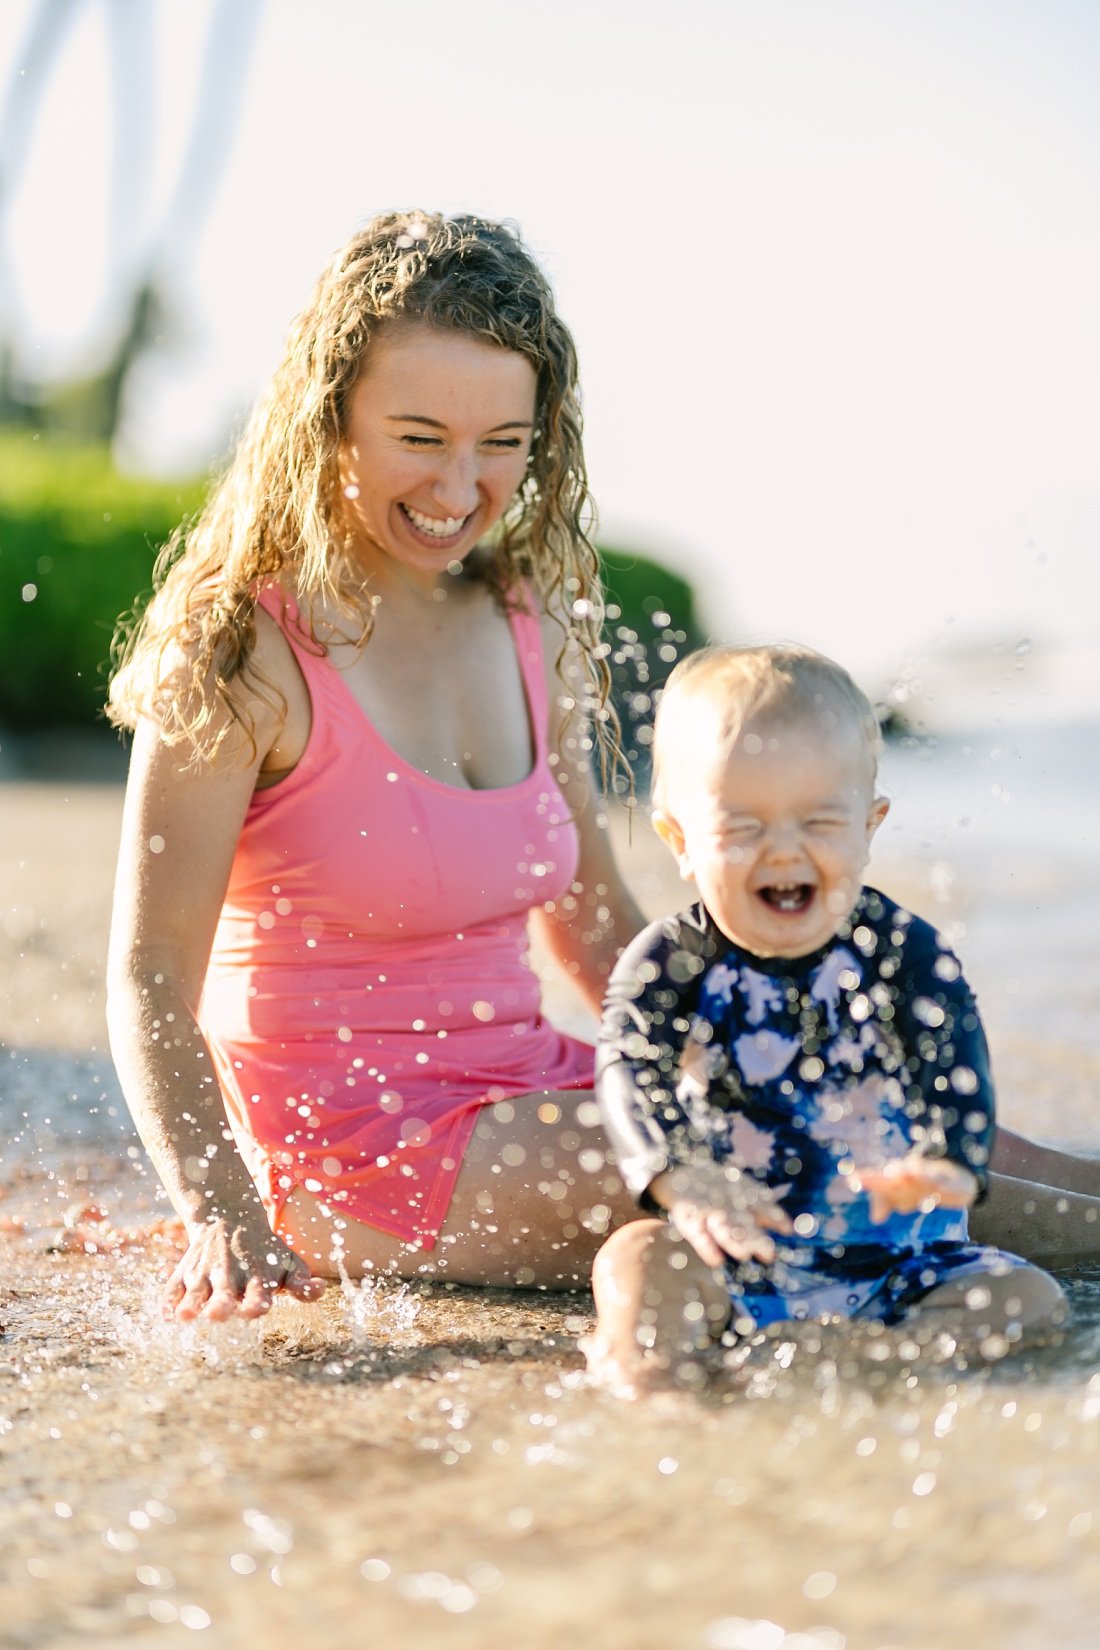 Family photographers in Oahu captures mom and baby playing in the water while he laughs with delight